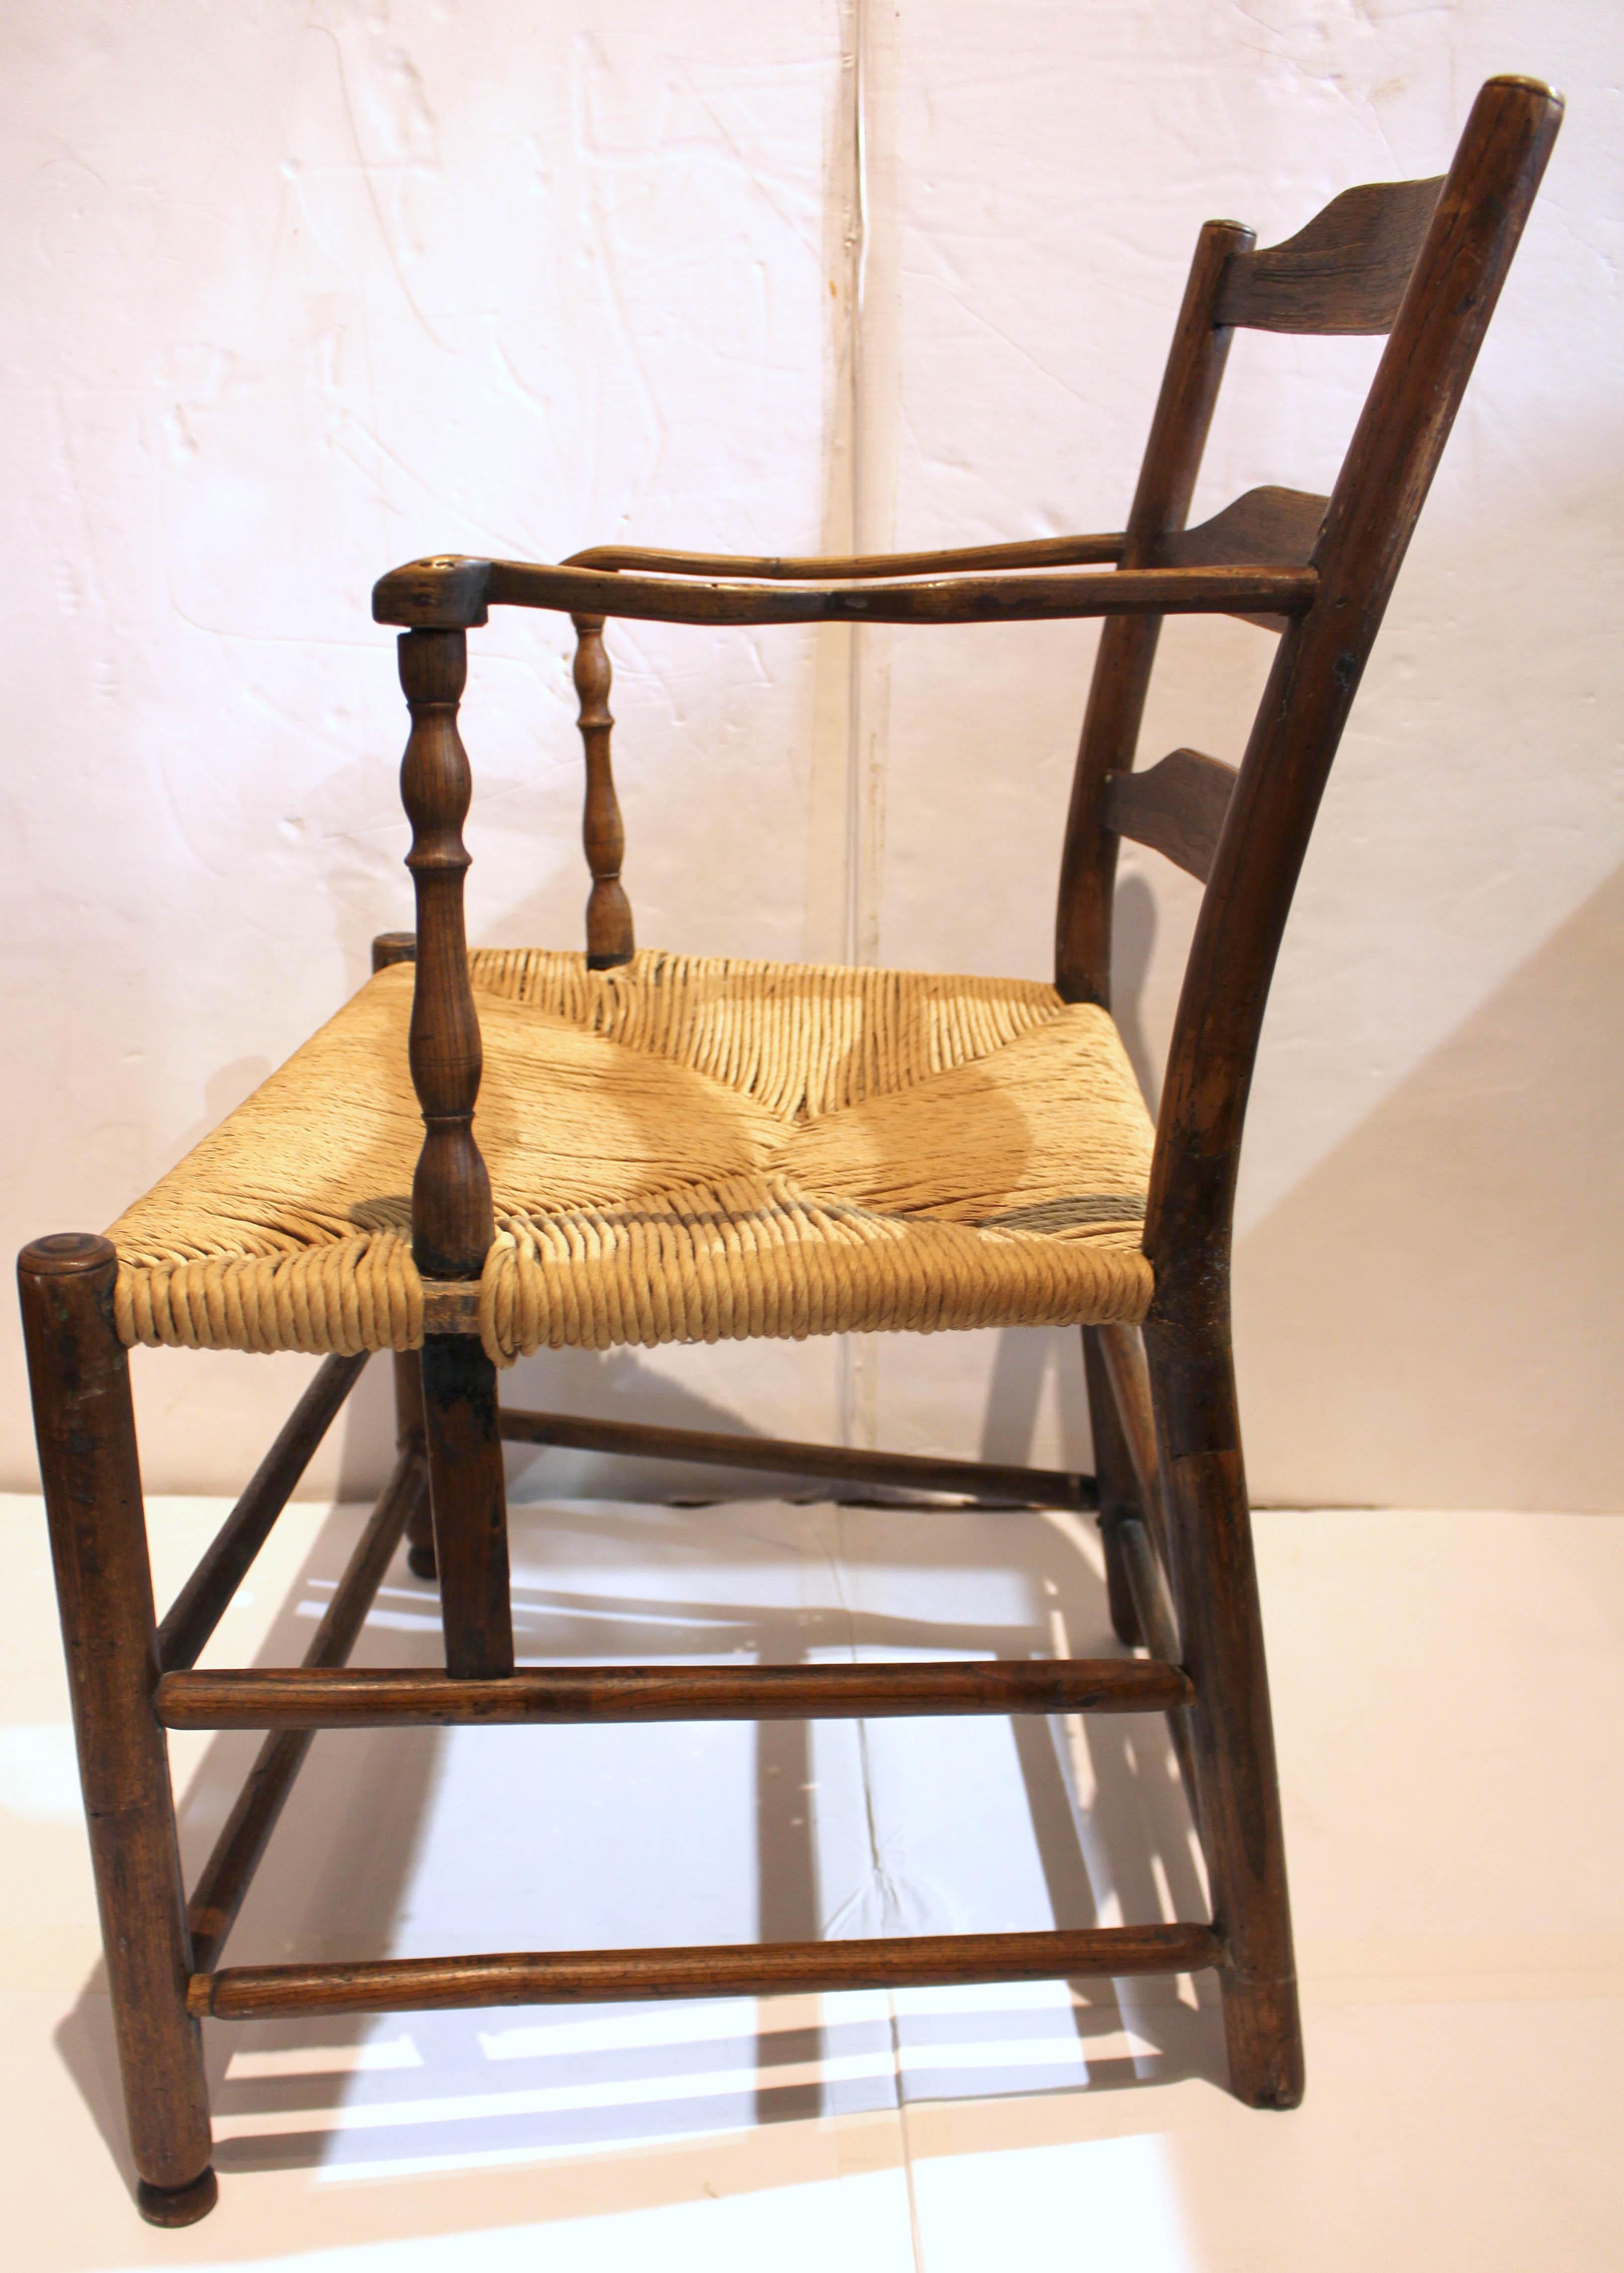 Turned Early 19th Century Country French Ladder-Back Arm Chair For Sale